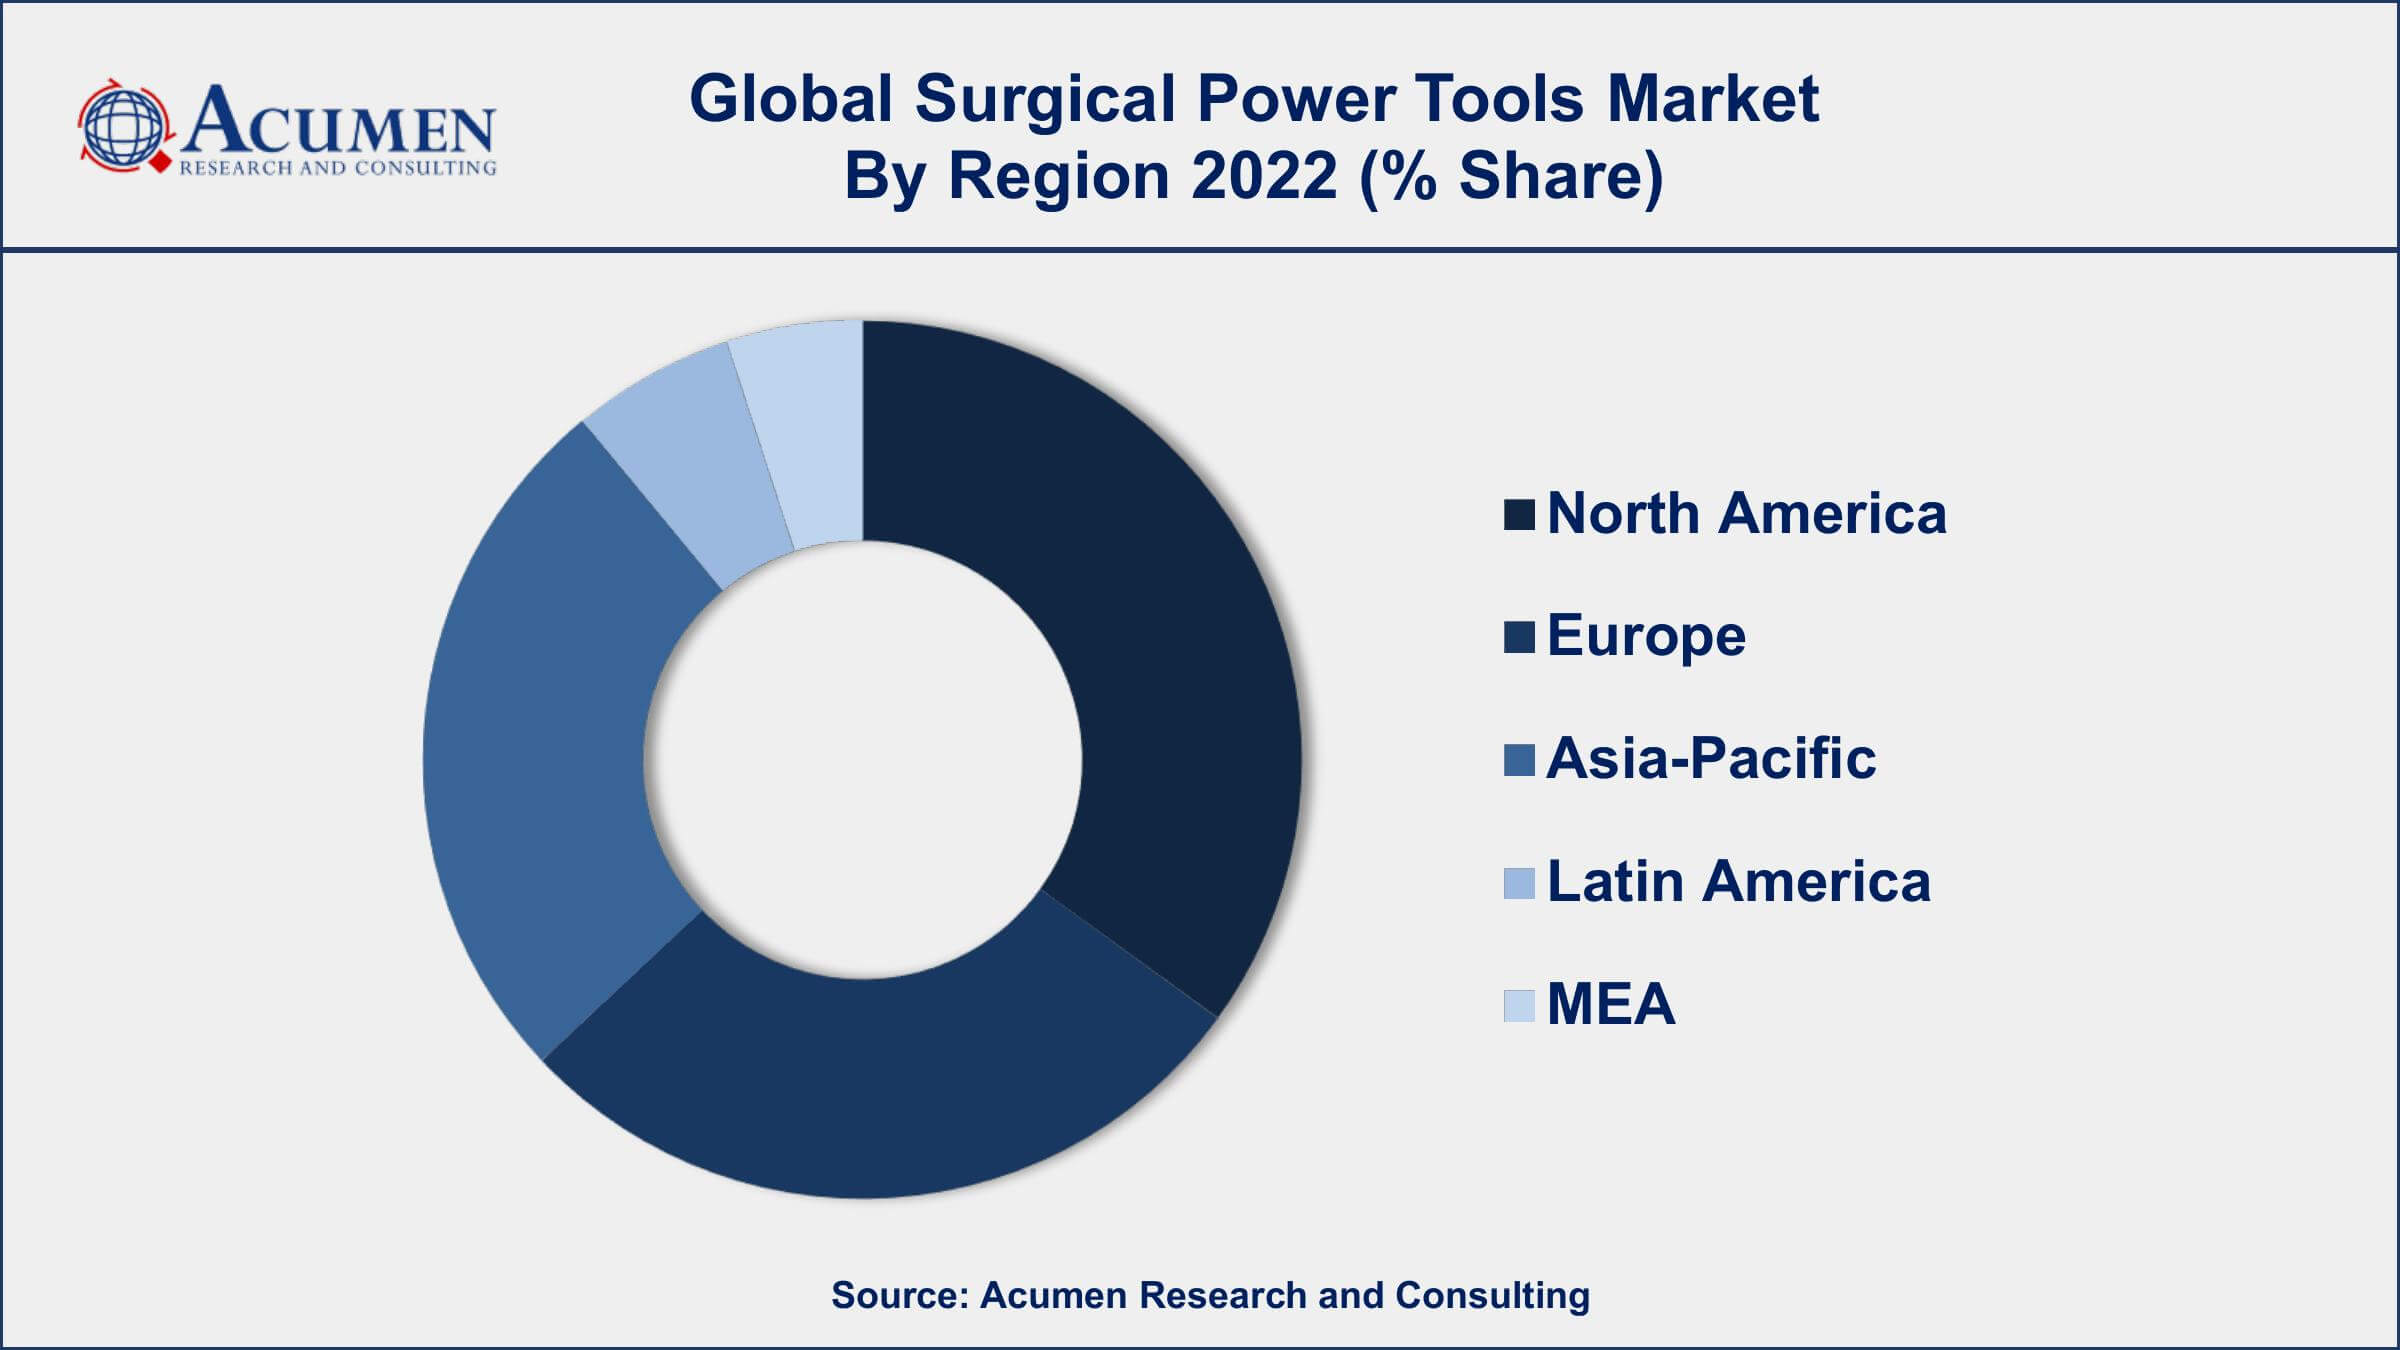 Surgical Power Tools Market Drivers